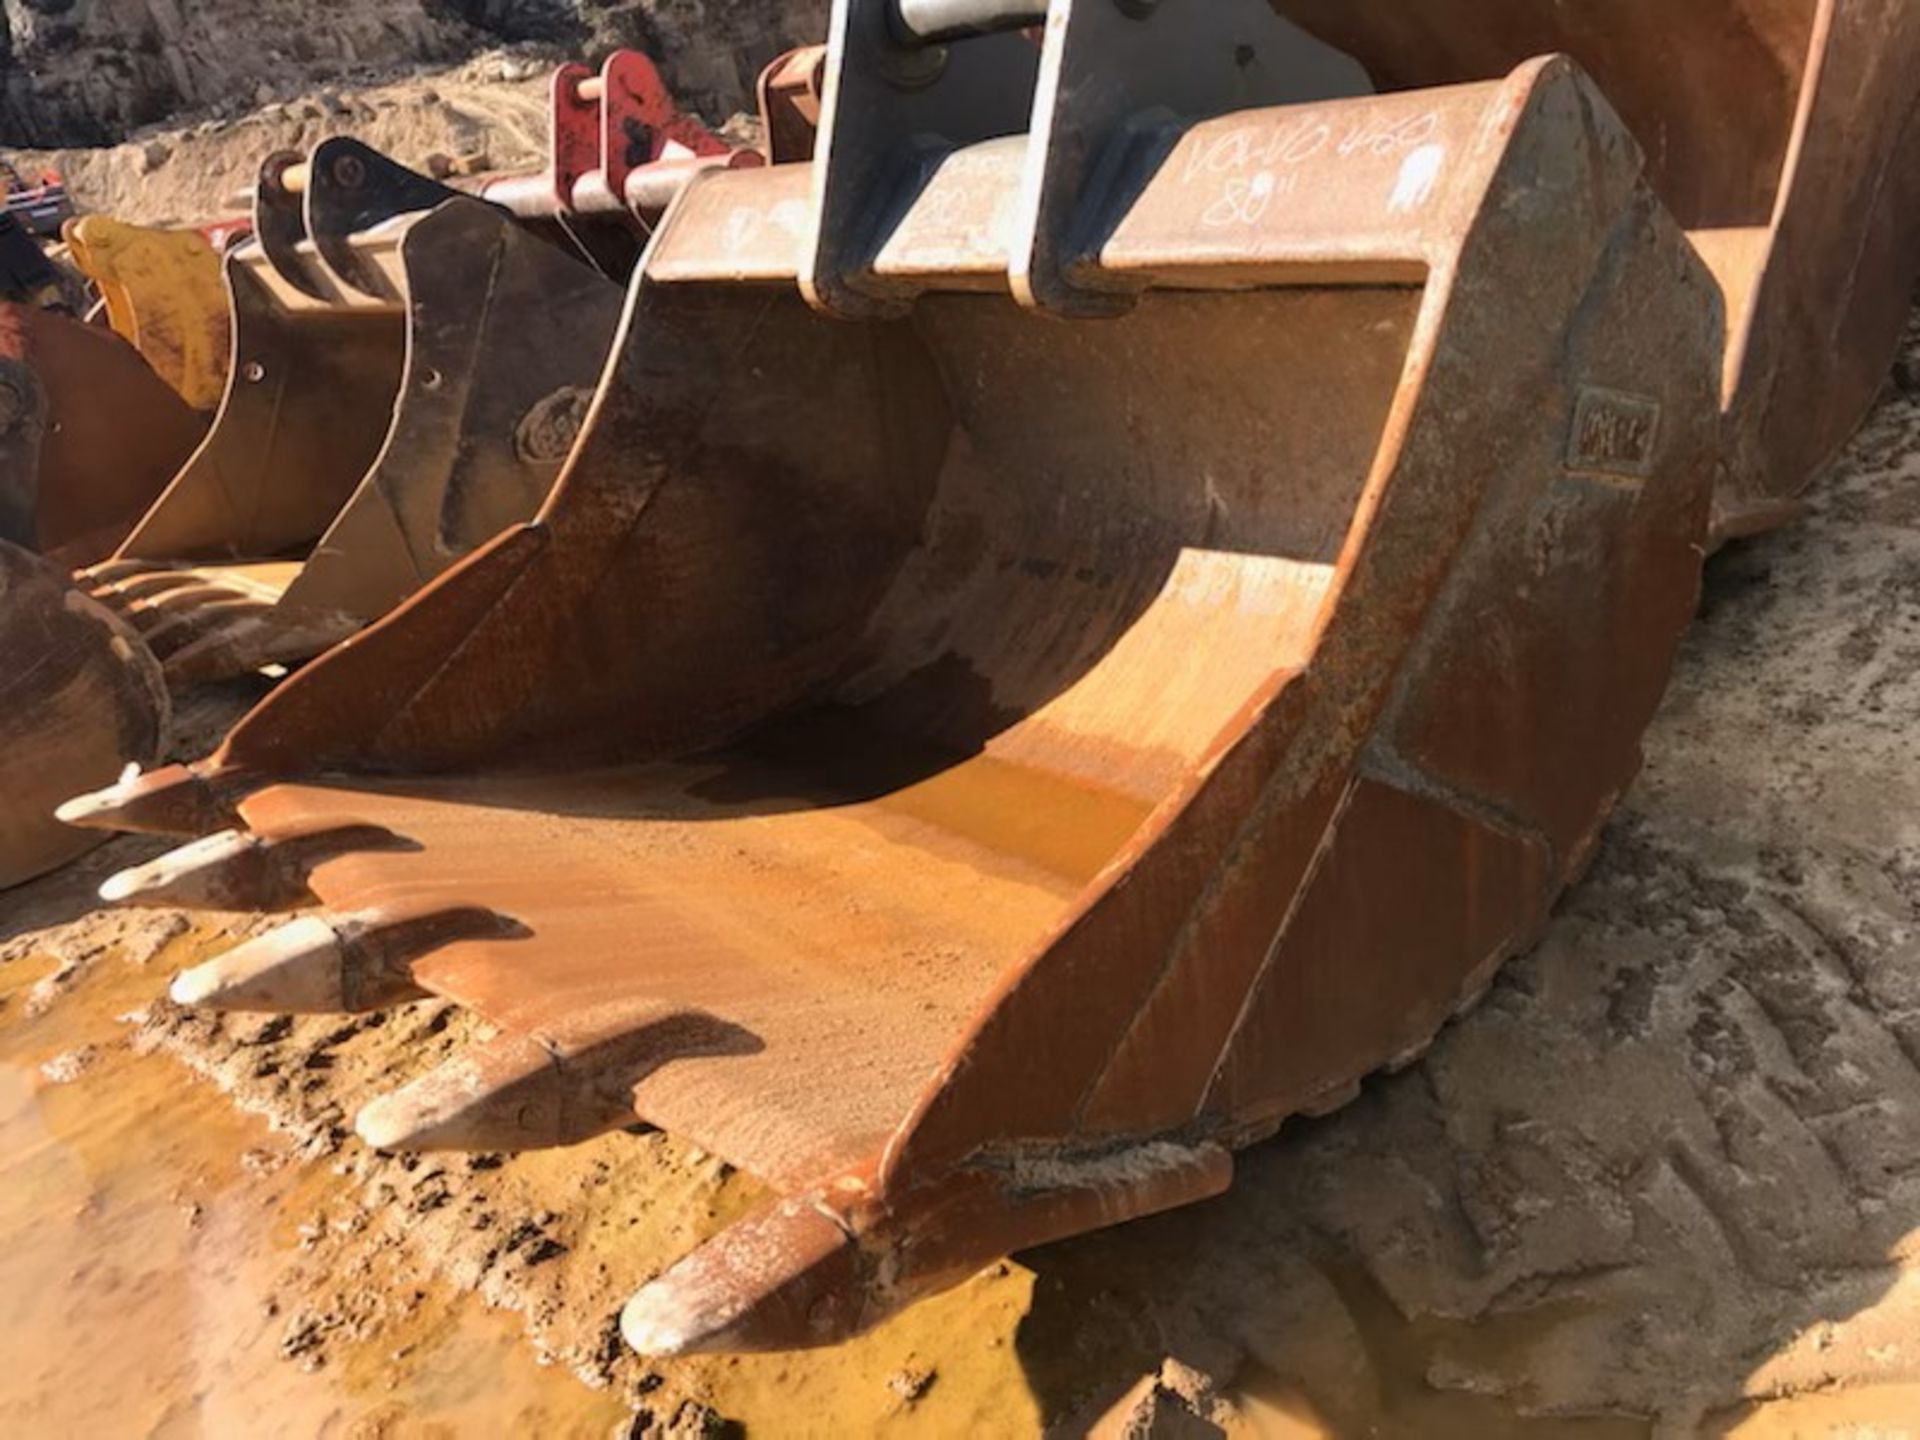 More buckets for Volvo 460